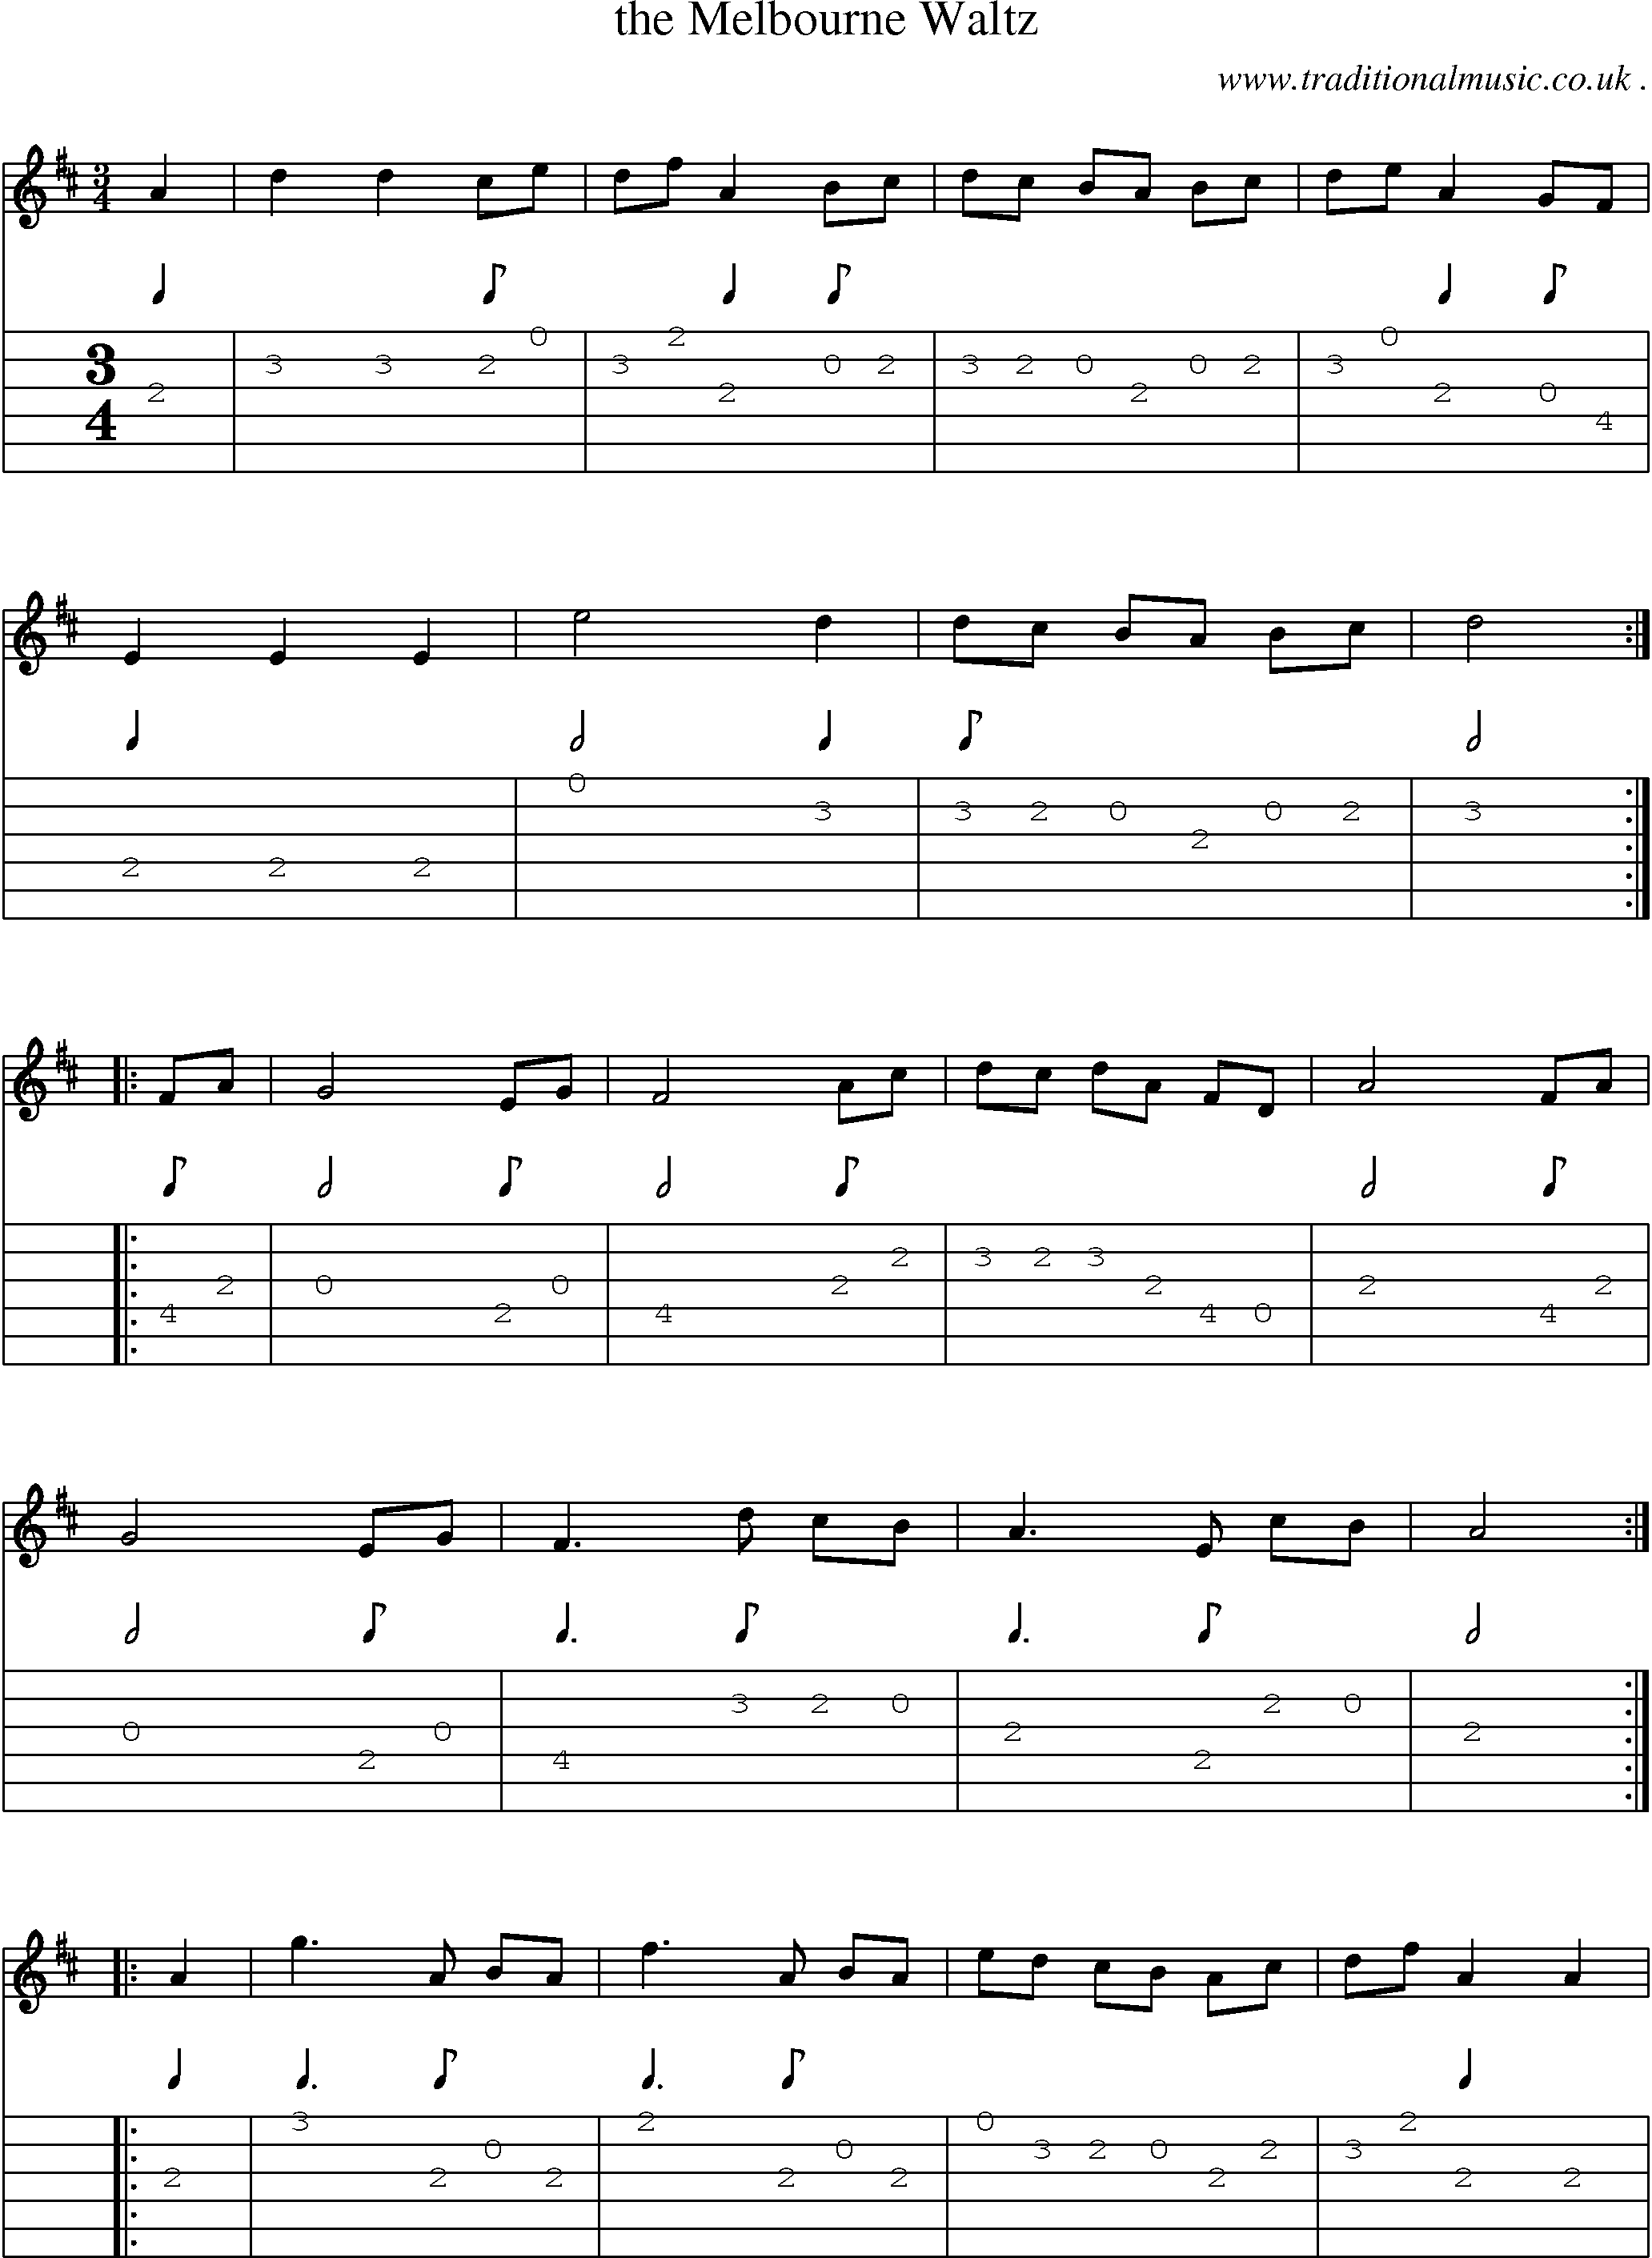 Sheet-Music and Guitar Tabs for The Melbourne Waltz